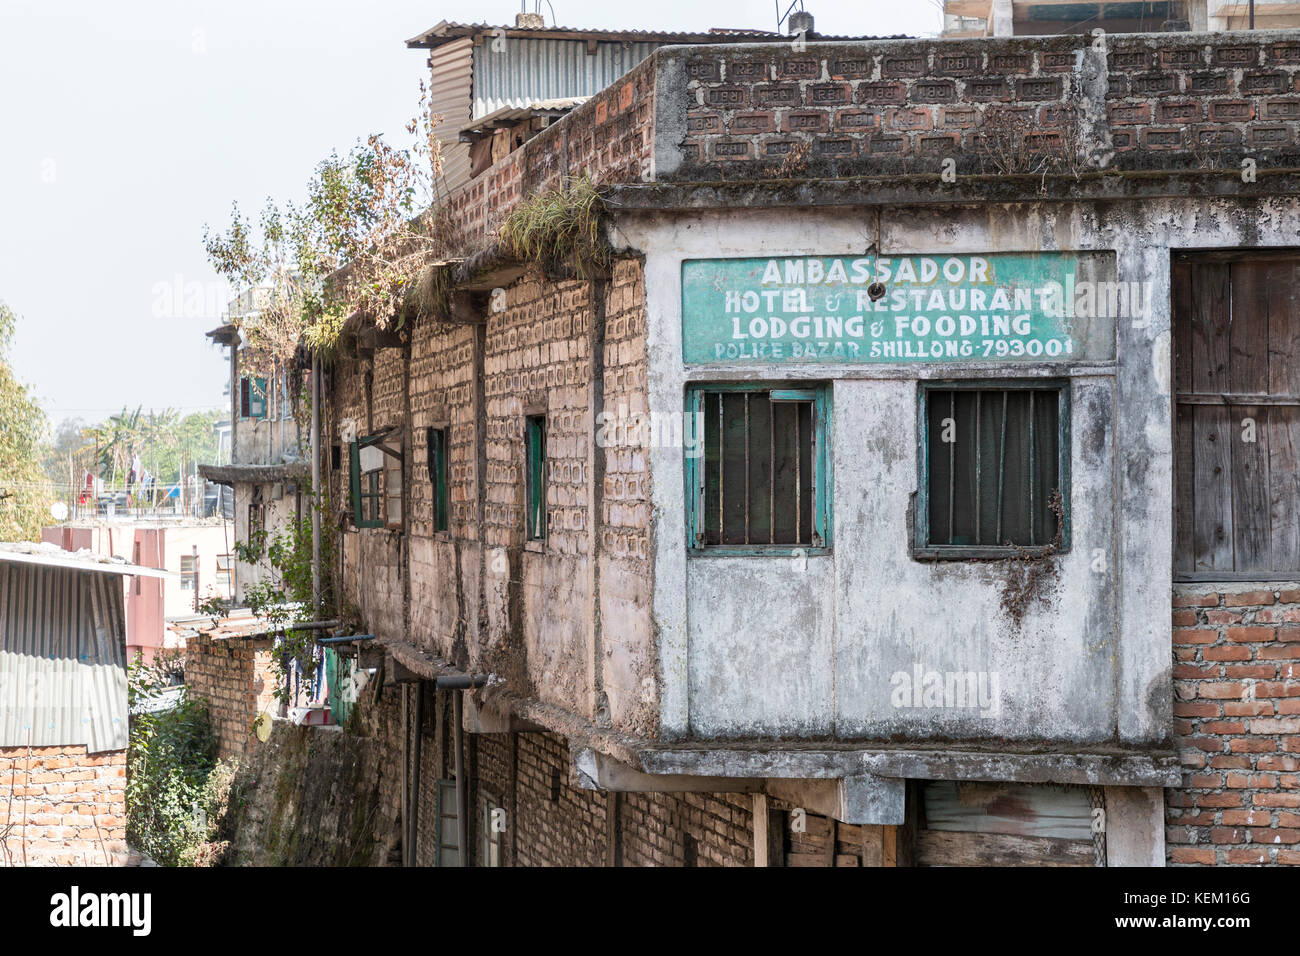 Hotel and restaurant sign on delapidated building, Shillong, Meghalaya, India Stock Photo